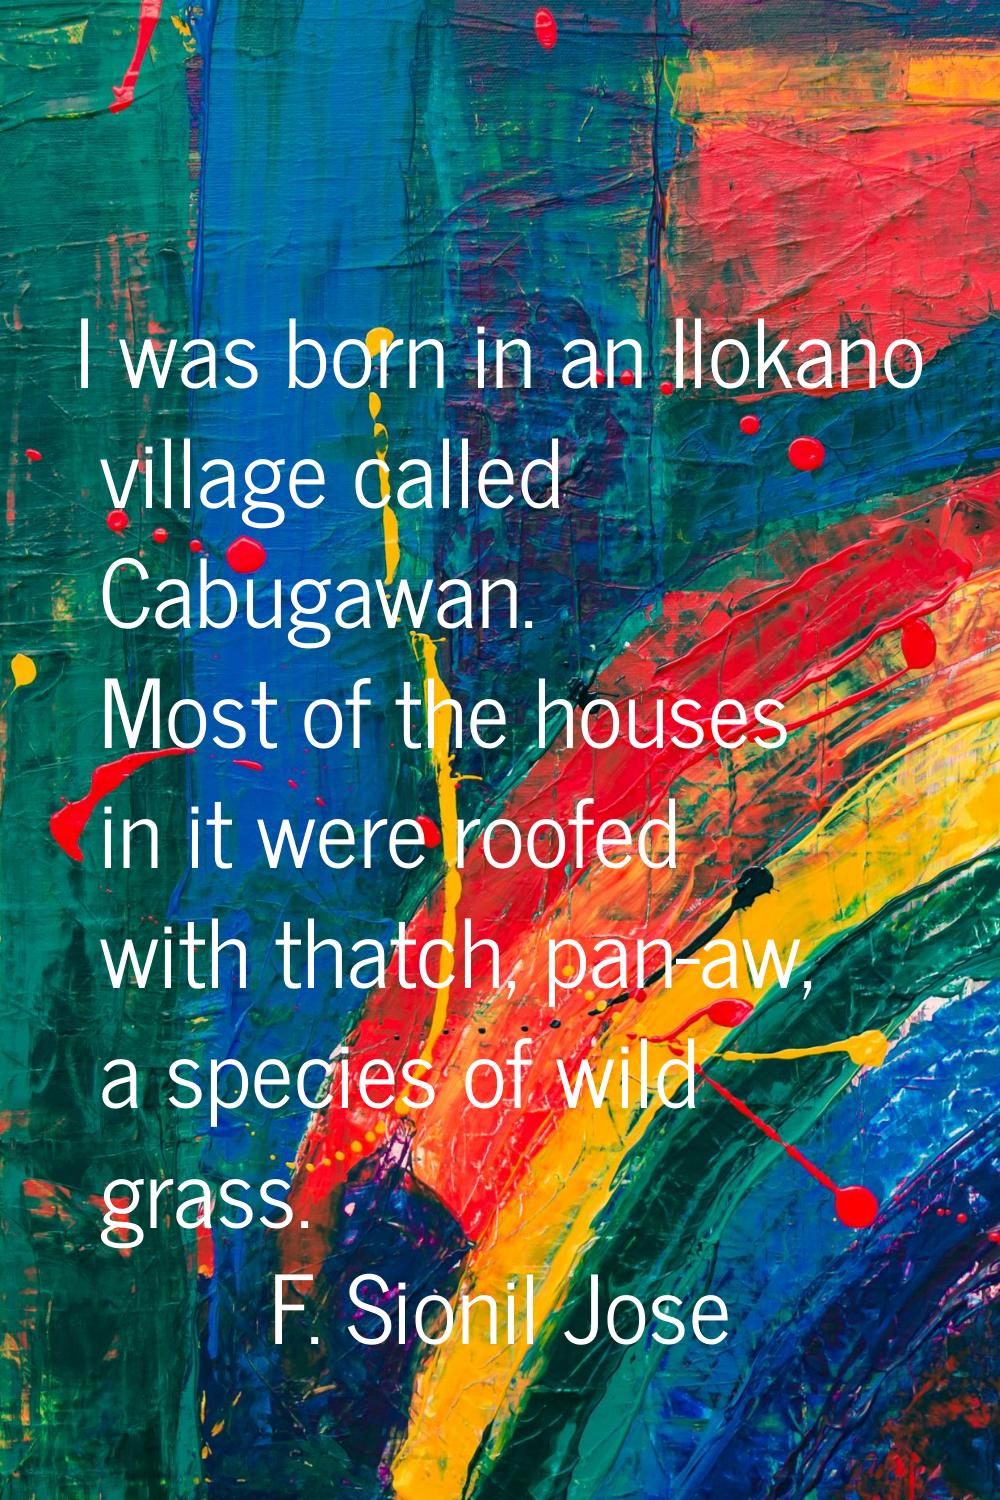 I was born in an Ilokano village called Cabugawan. Most of the houses in it were roofed with thatch